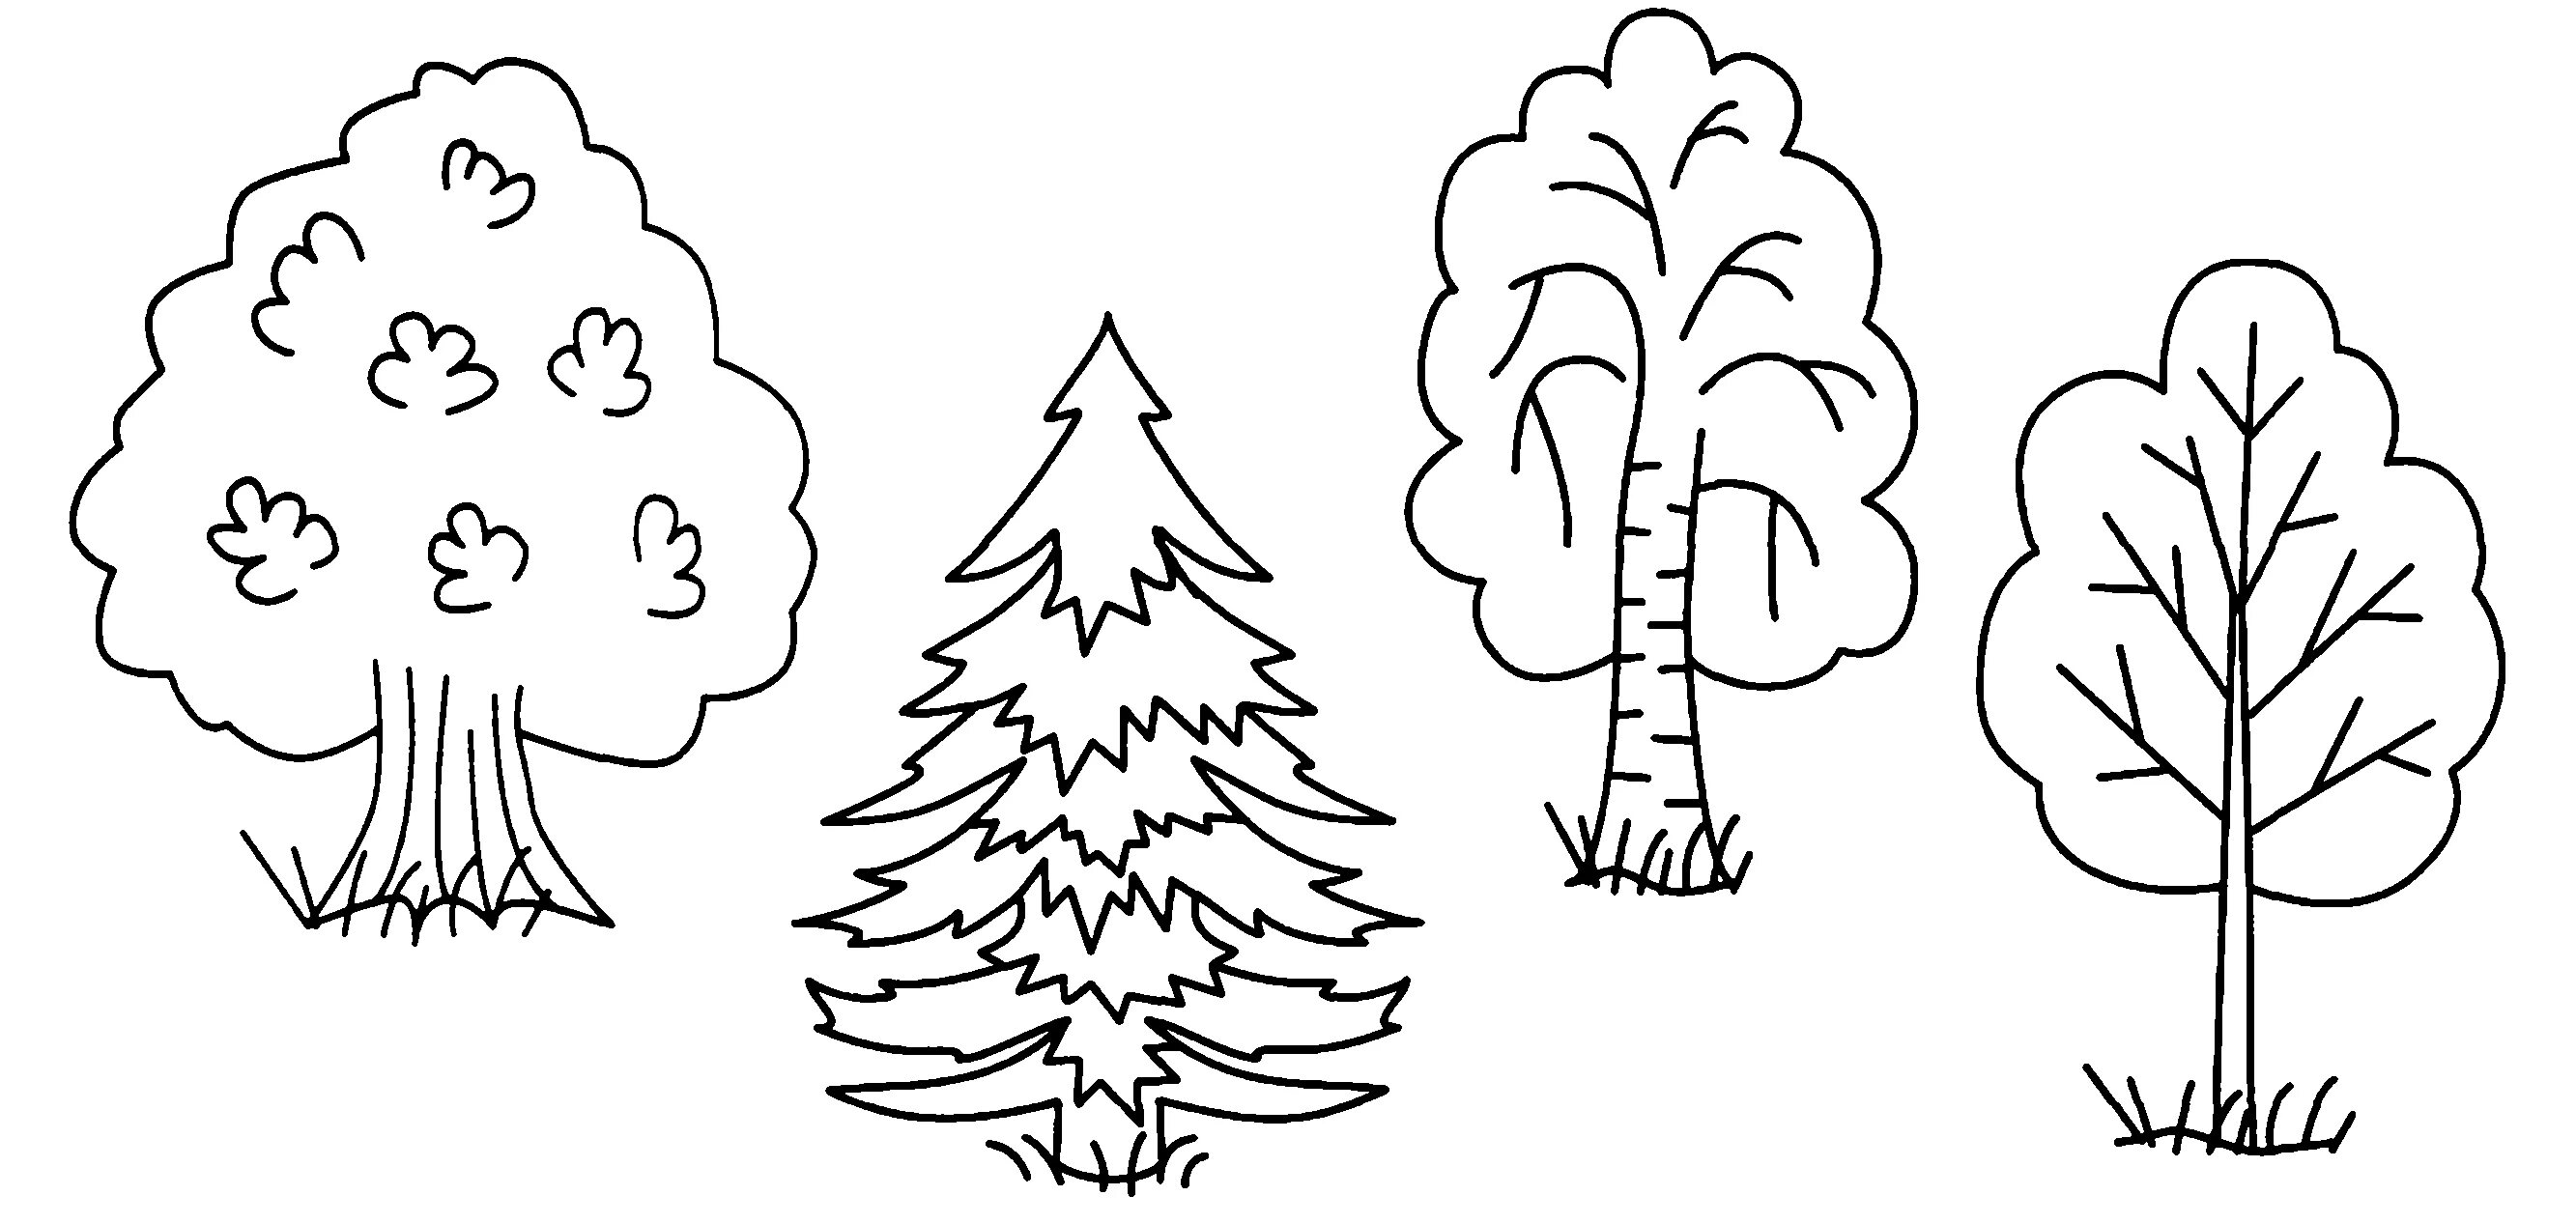 The jubilant tree coloring page for 6-7 year olds